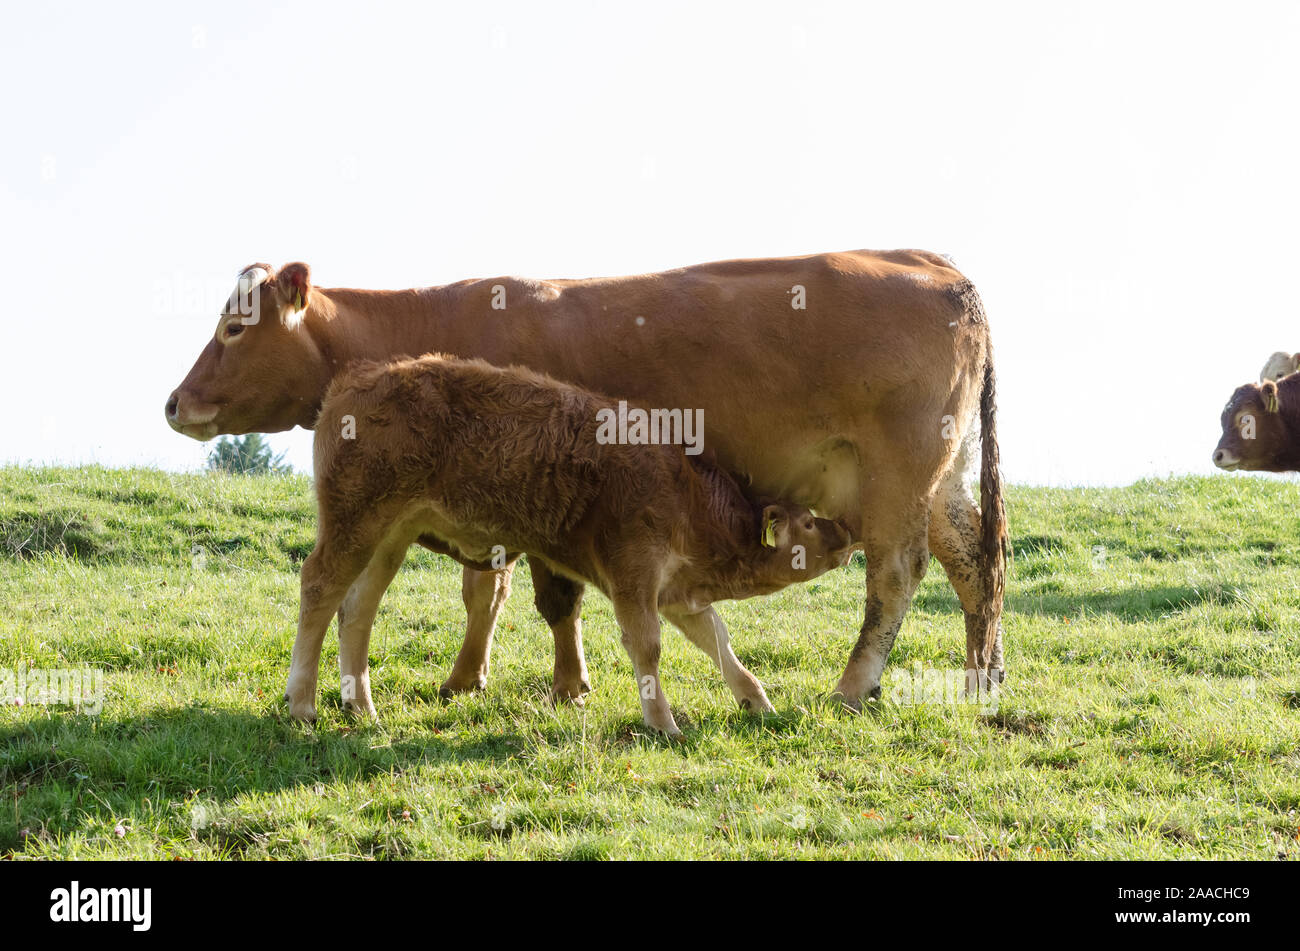 Young calf drinking milk from udder, Domestic cattle livestock, Bos Taurus, near a cattle farm on a pasture in Germany, Western Europe Stock Photo